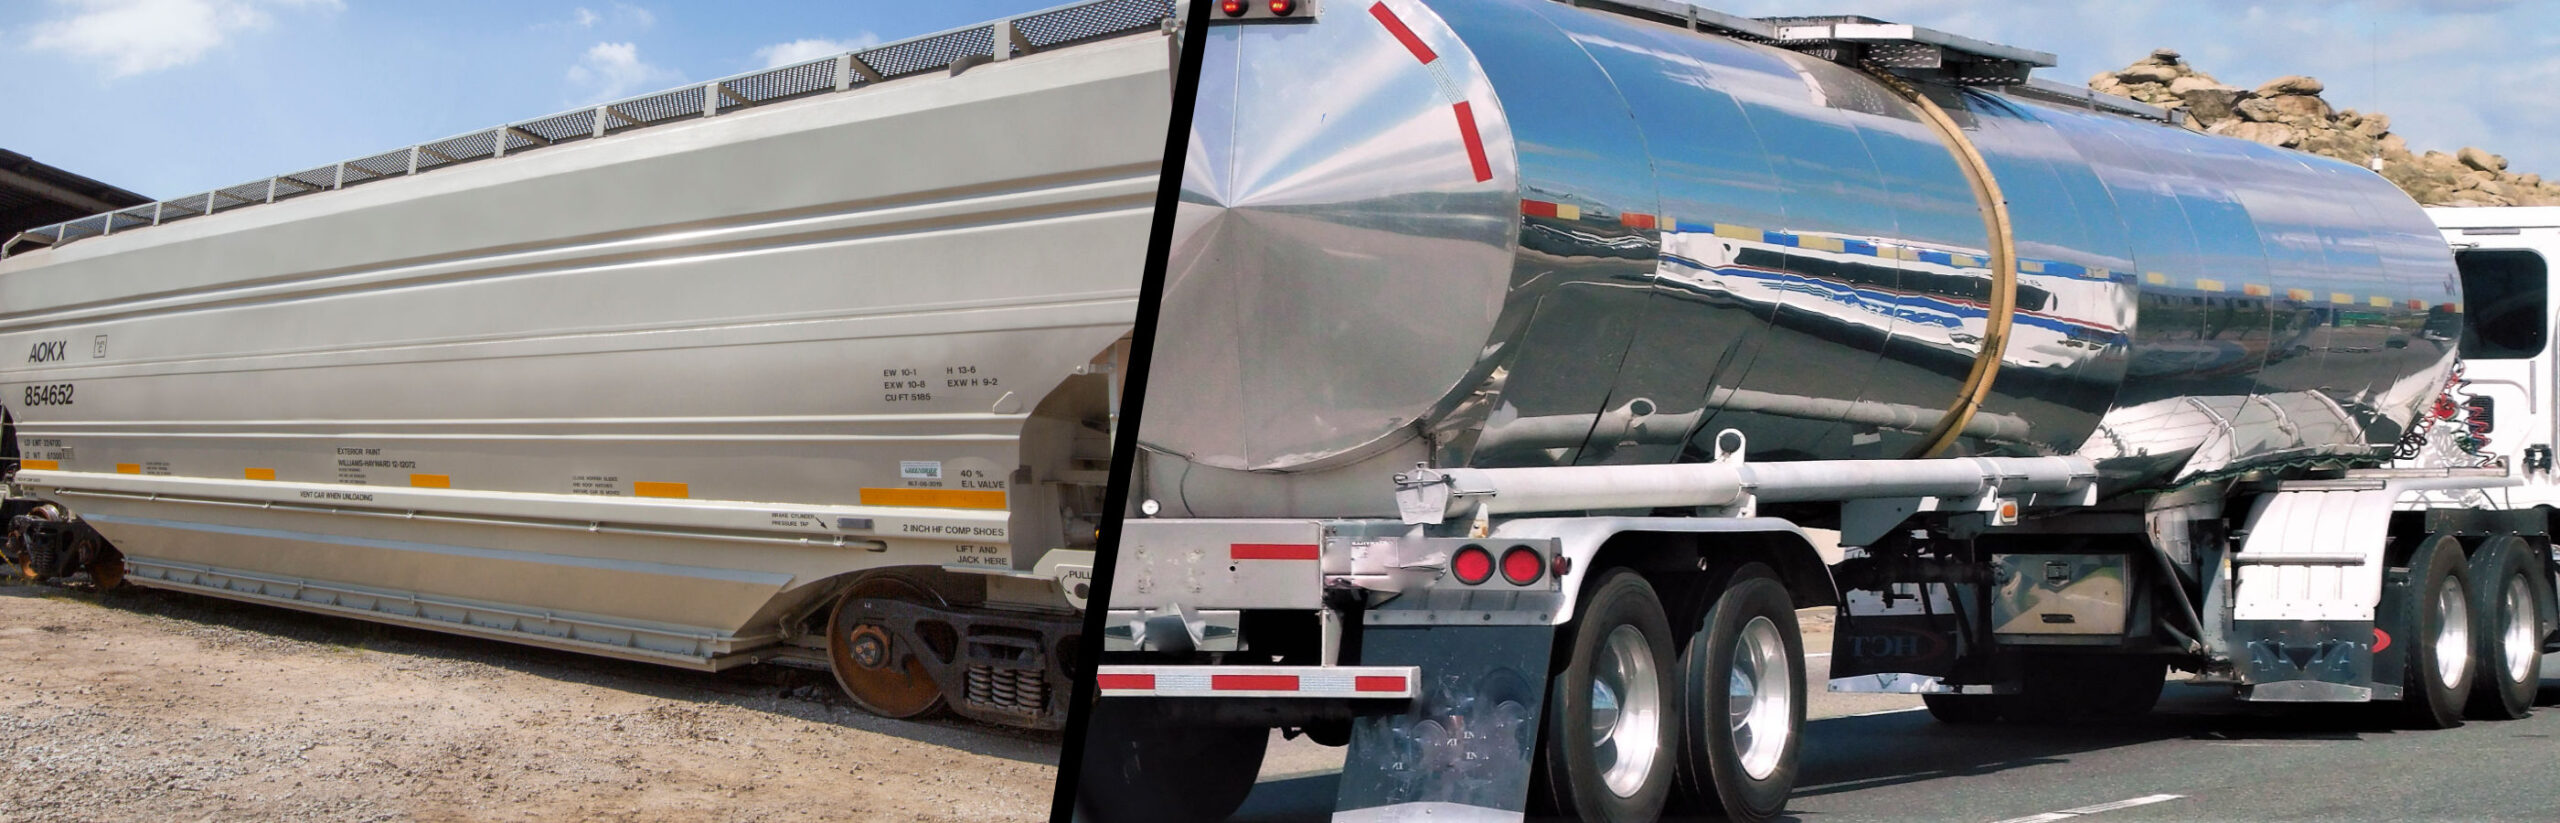 Industrial-Cleaners-Truck-and-Railcar-Cleaning